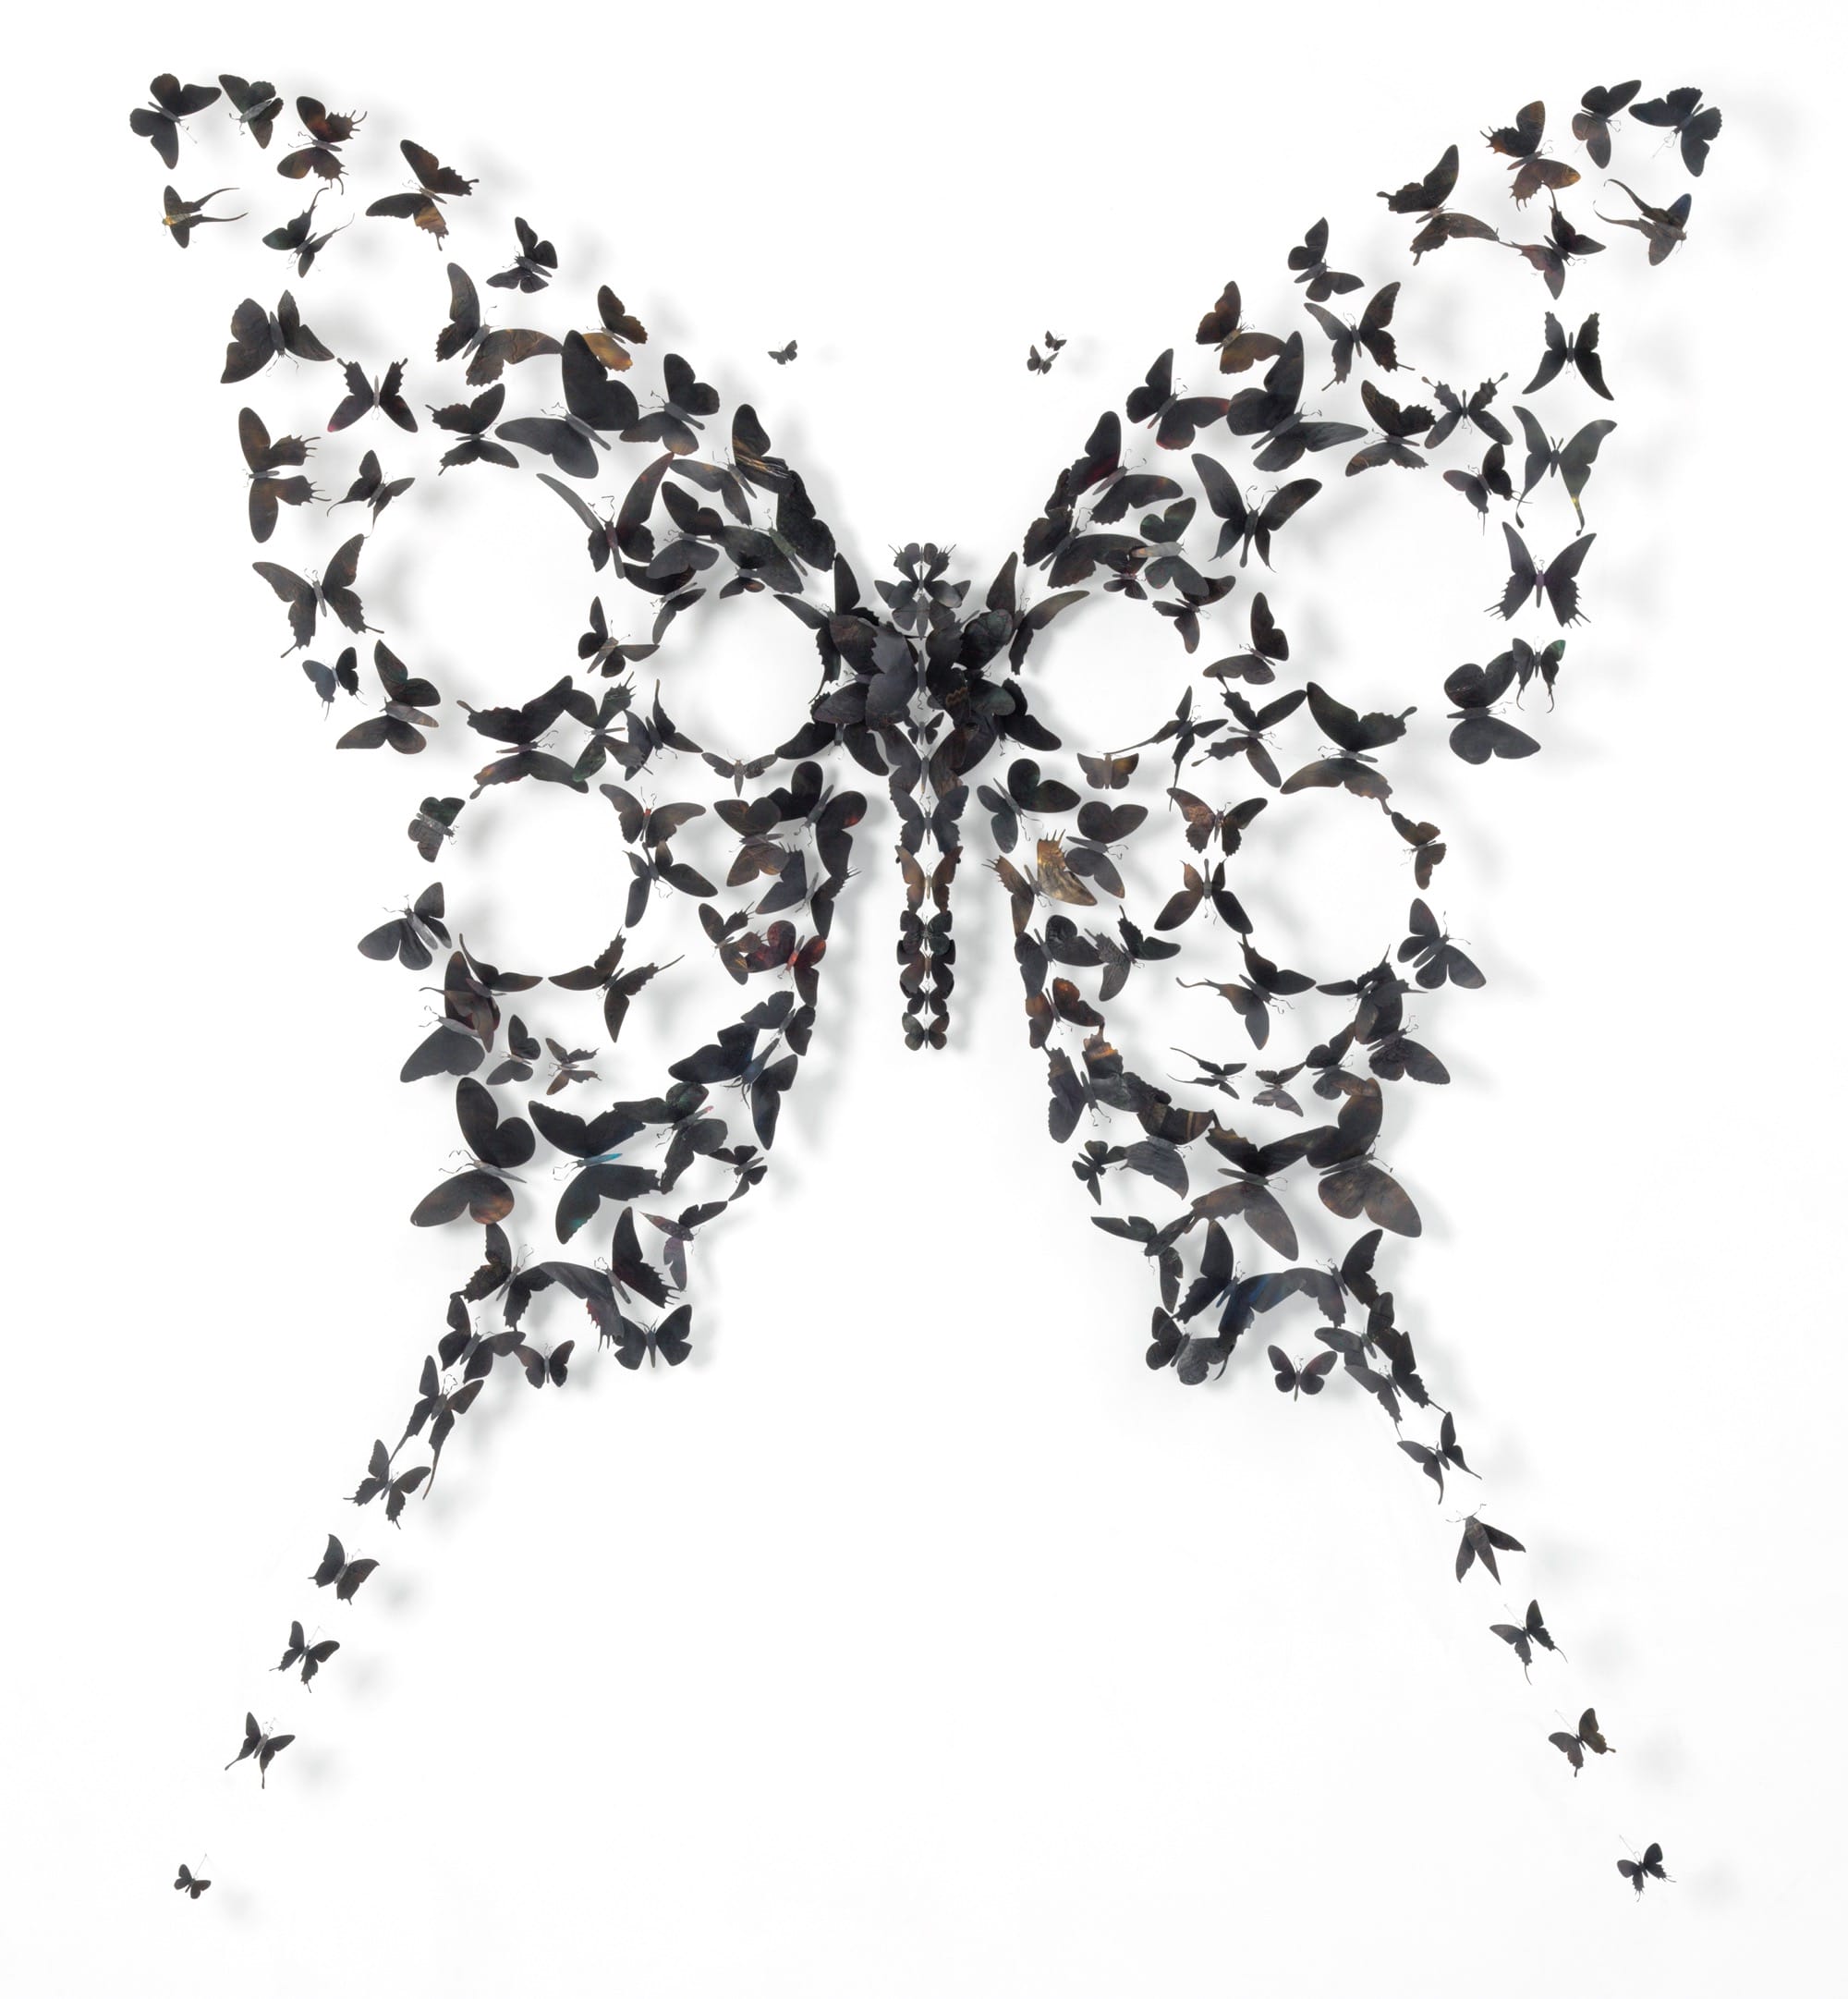 a wall installation of numerous black butterflies made from repurposed aluminum, formed into the overall shape of a larger butterfly